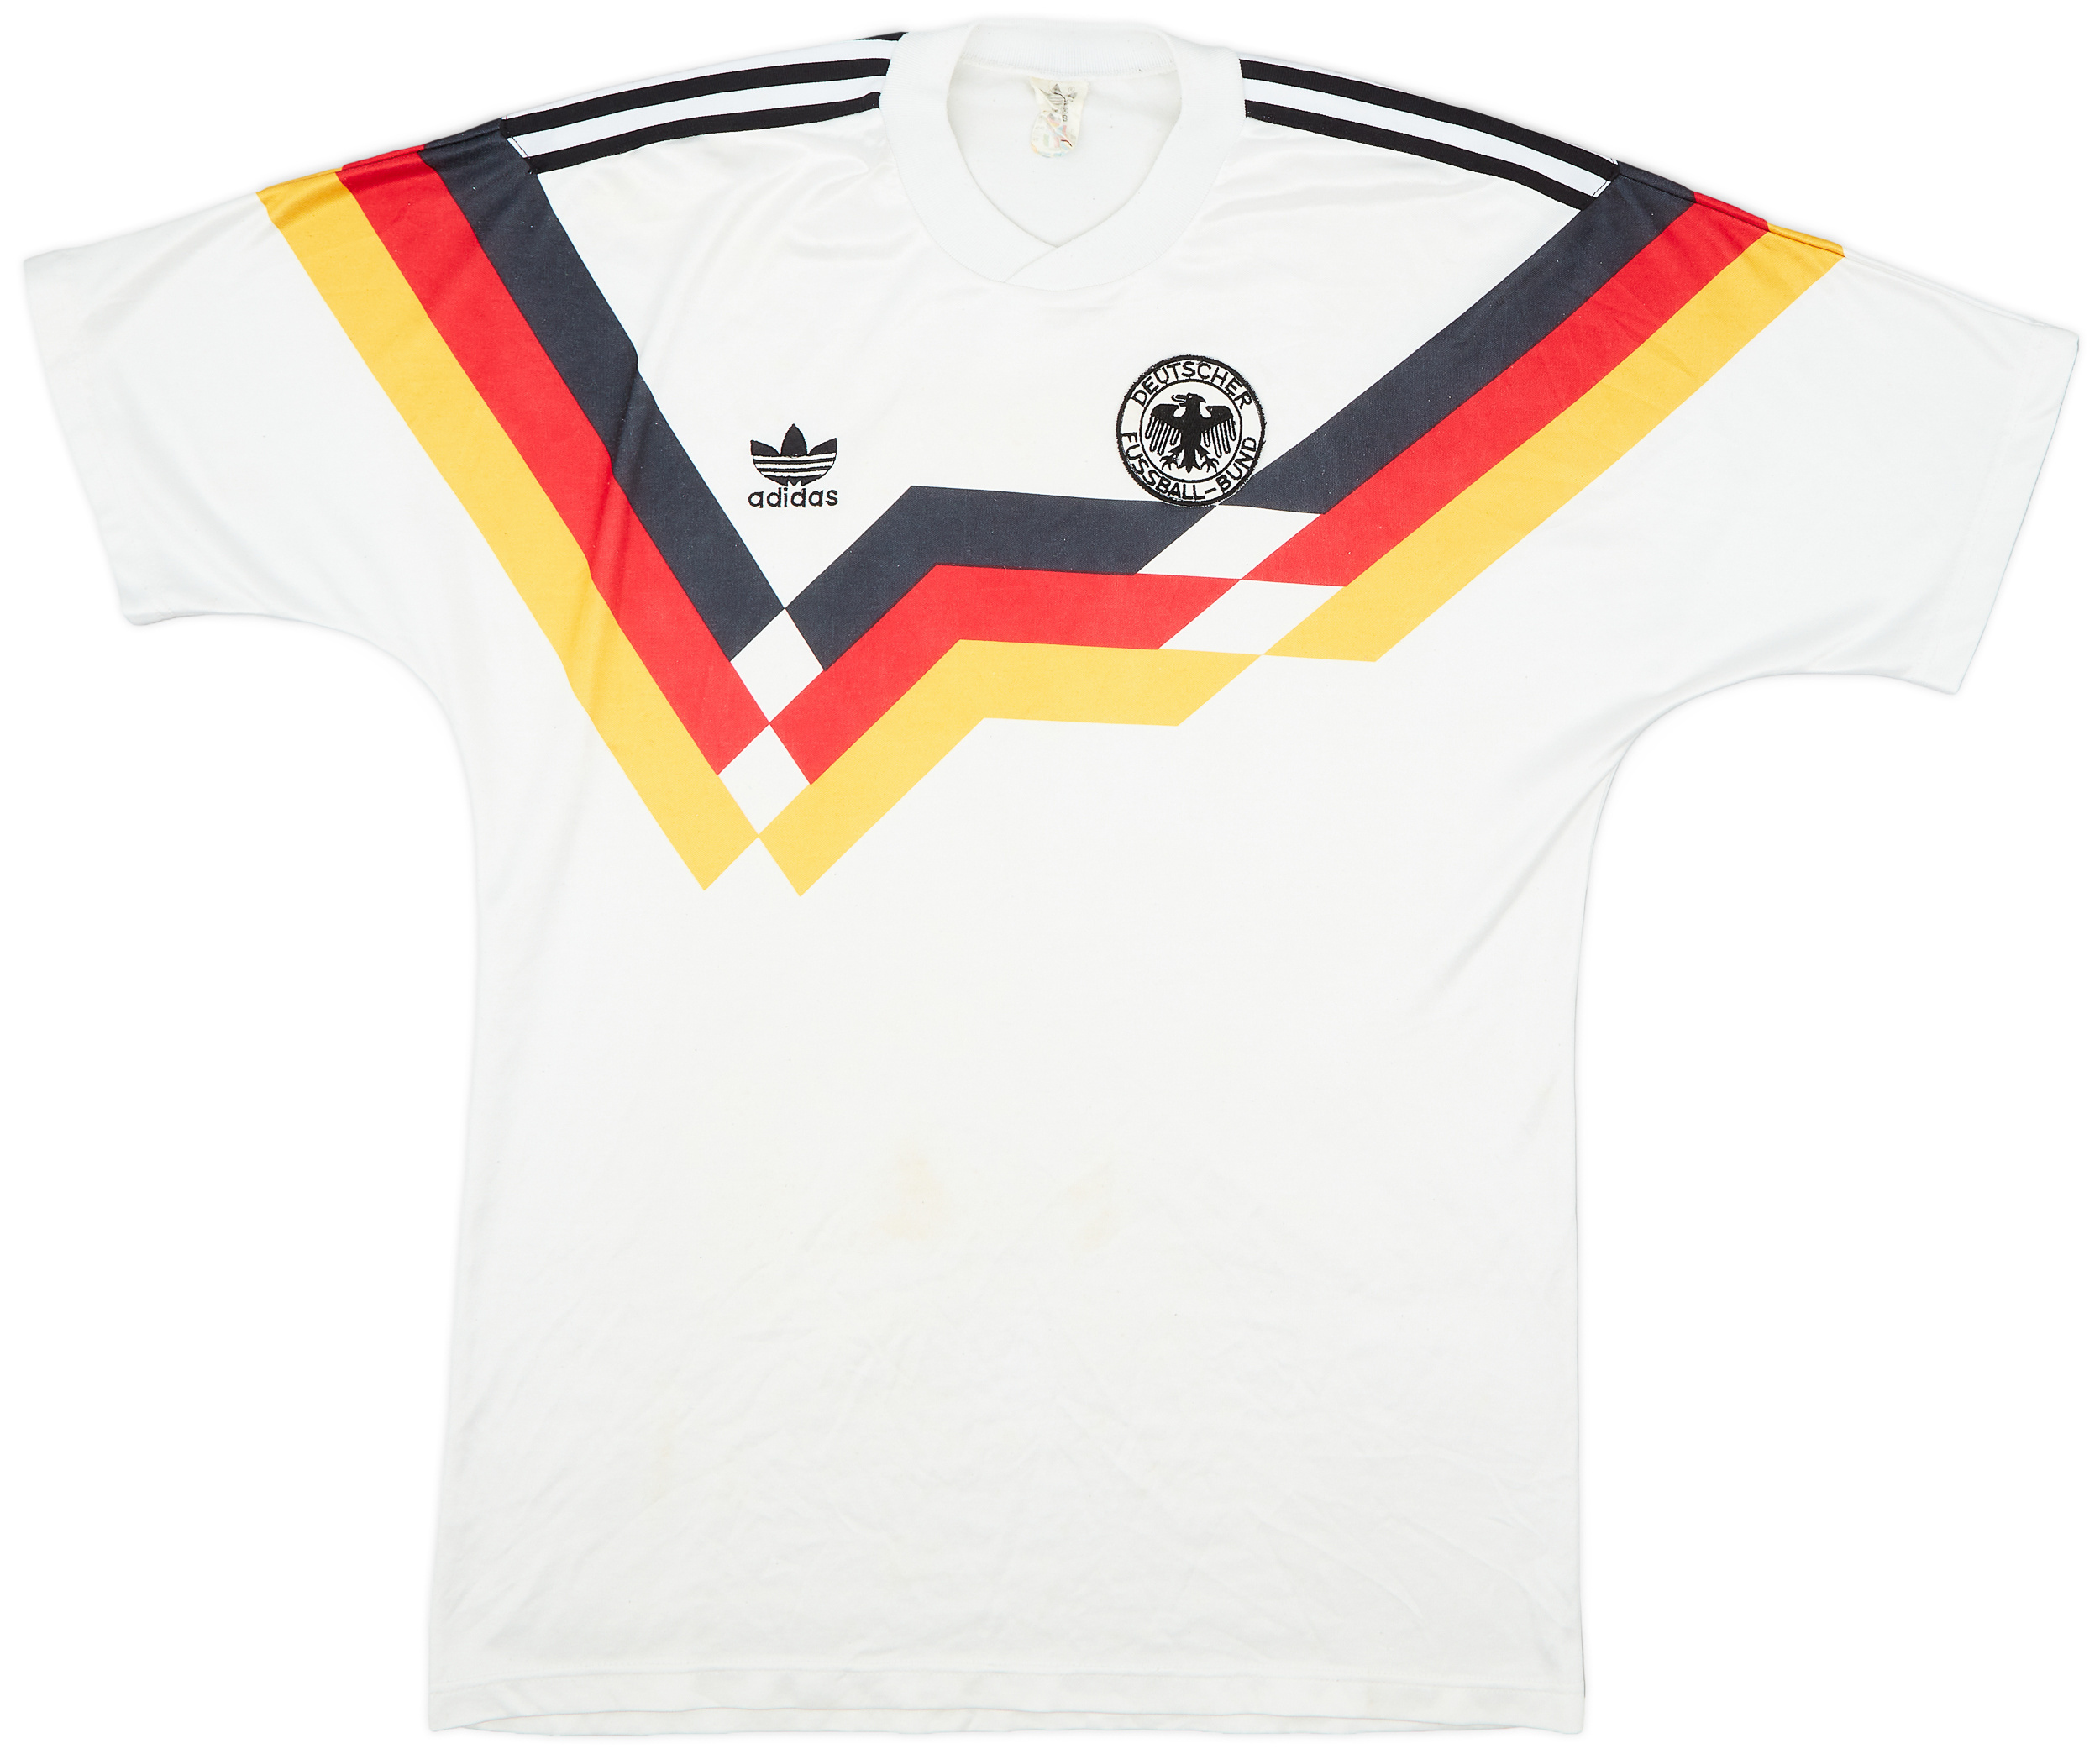 1988-91 West Germany Home Shirt - 6/10 - (/)